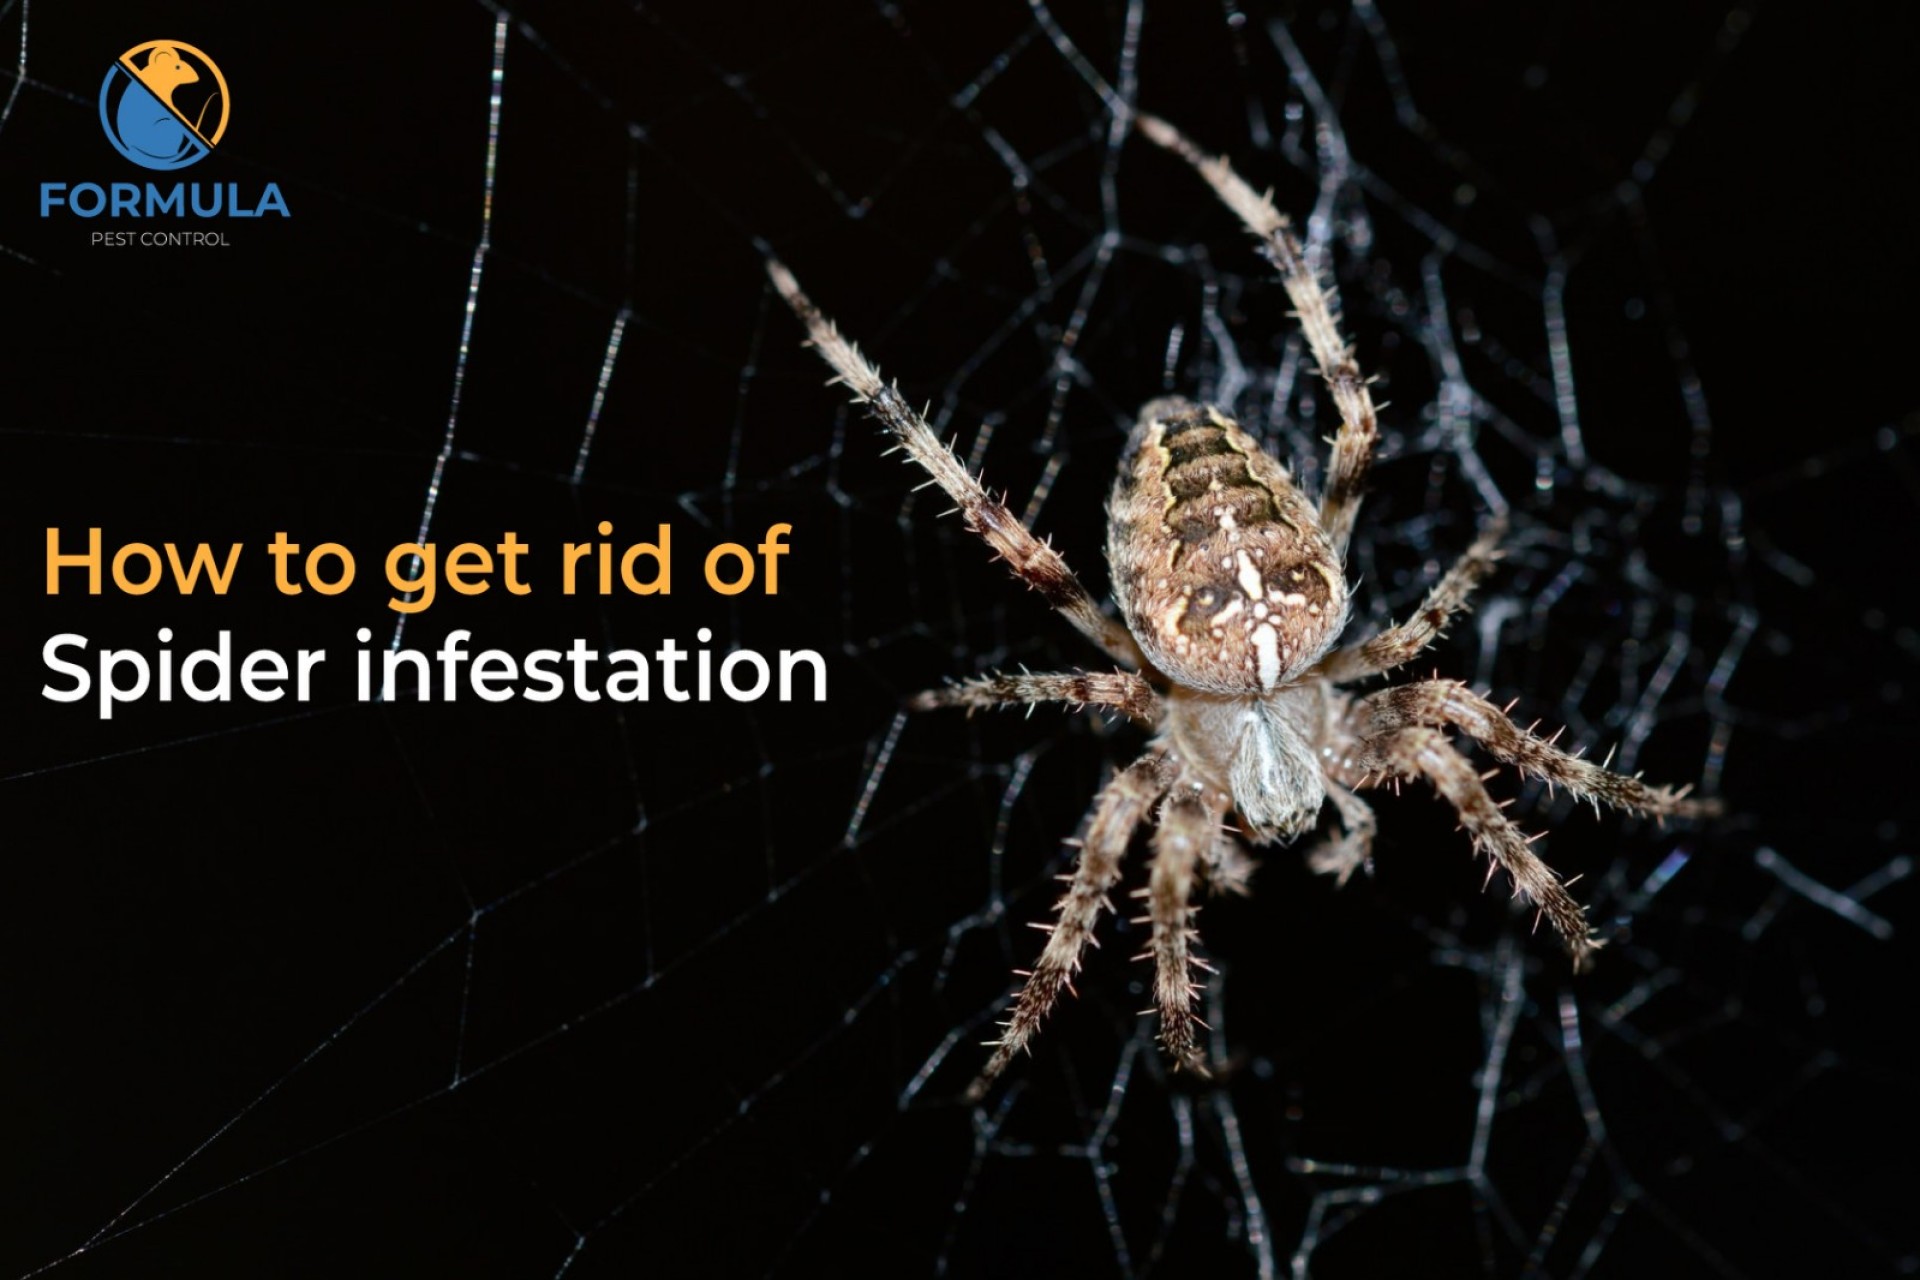 How to get rid of spider infestation